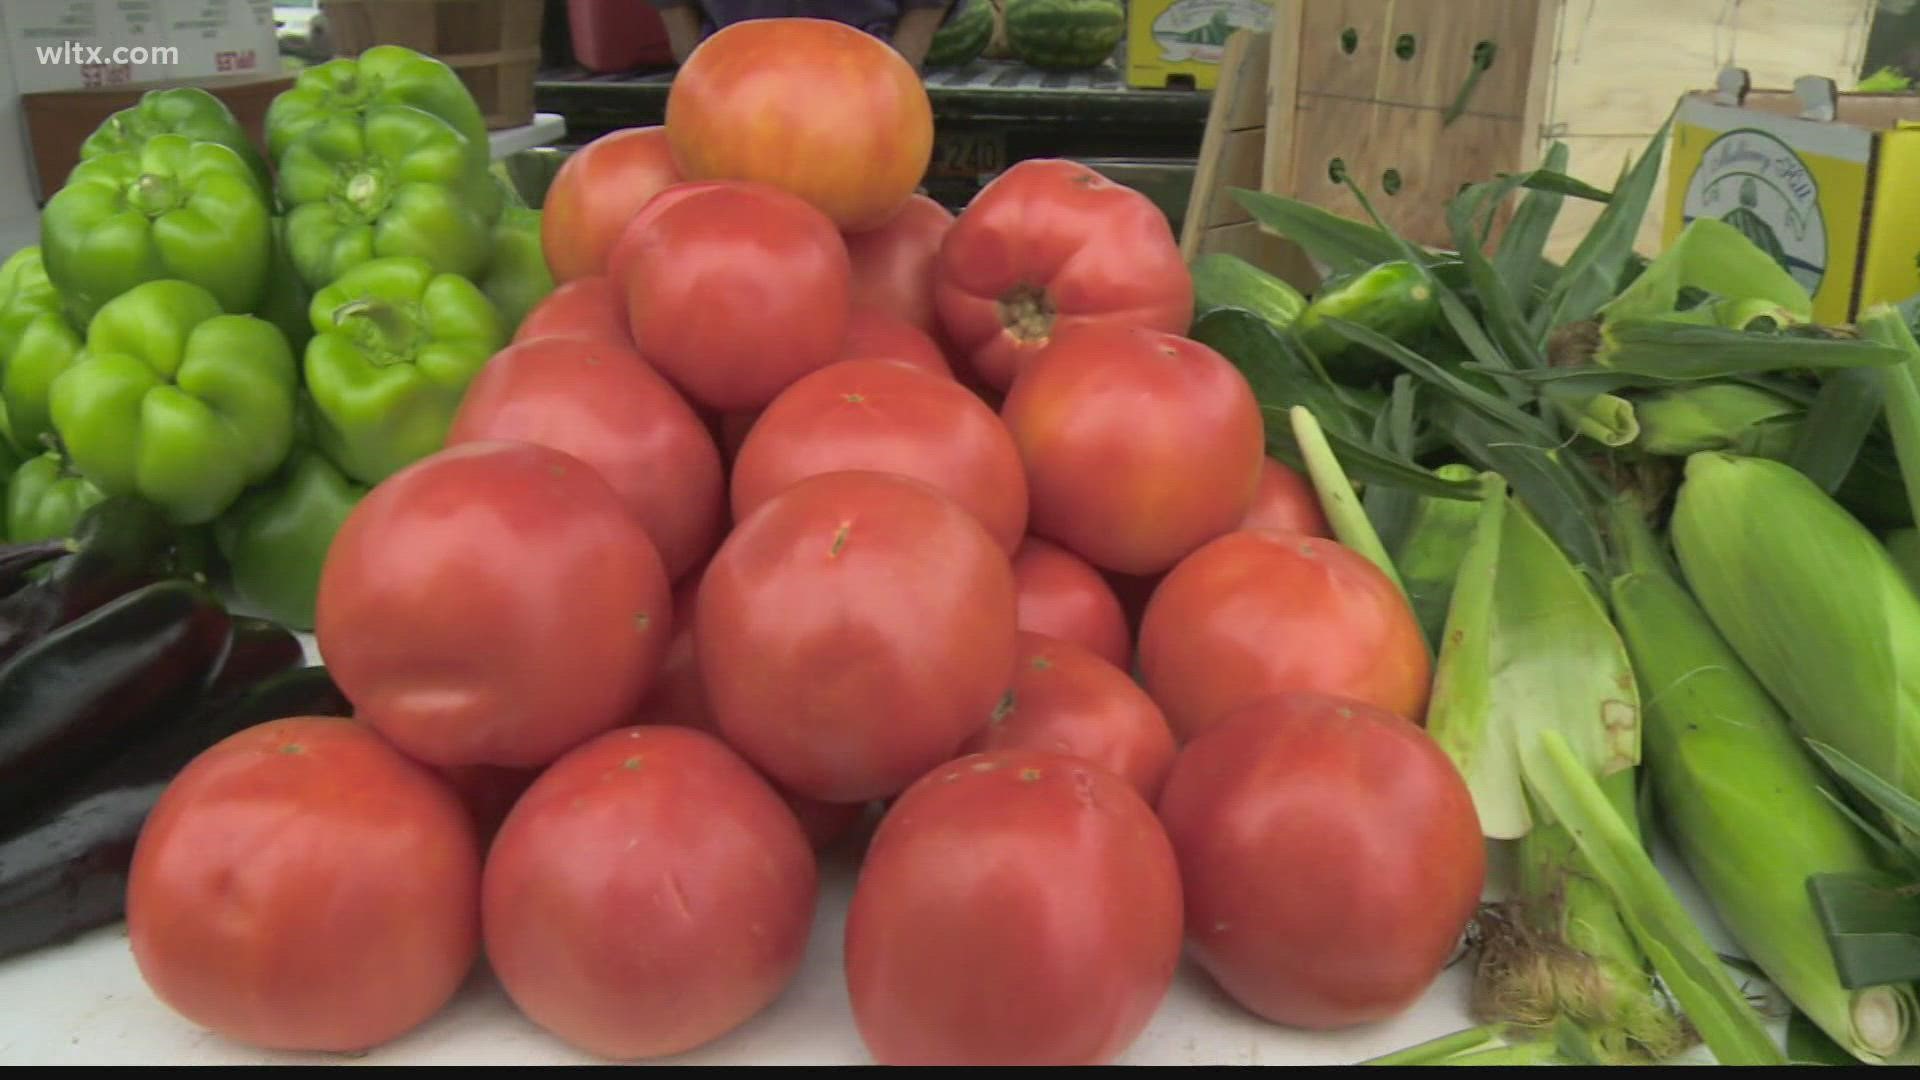 A new program called “Growing Local SC” aims to get healthy food into the homes of all South Carolinians.